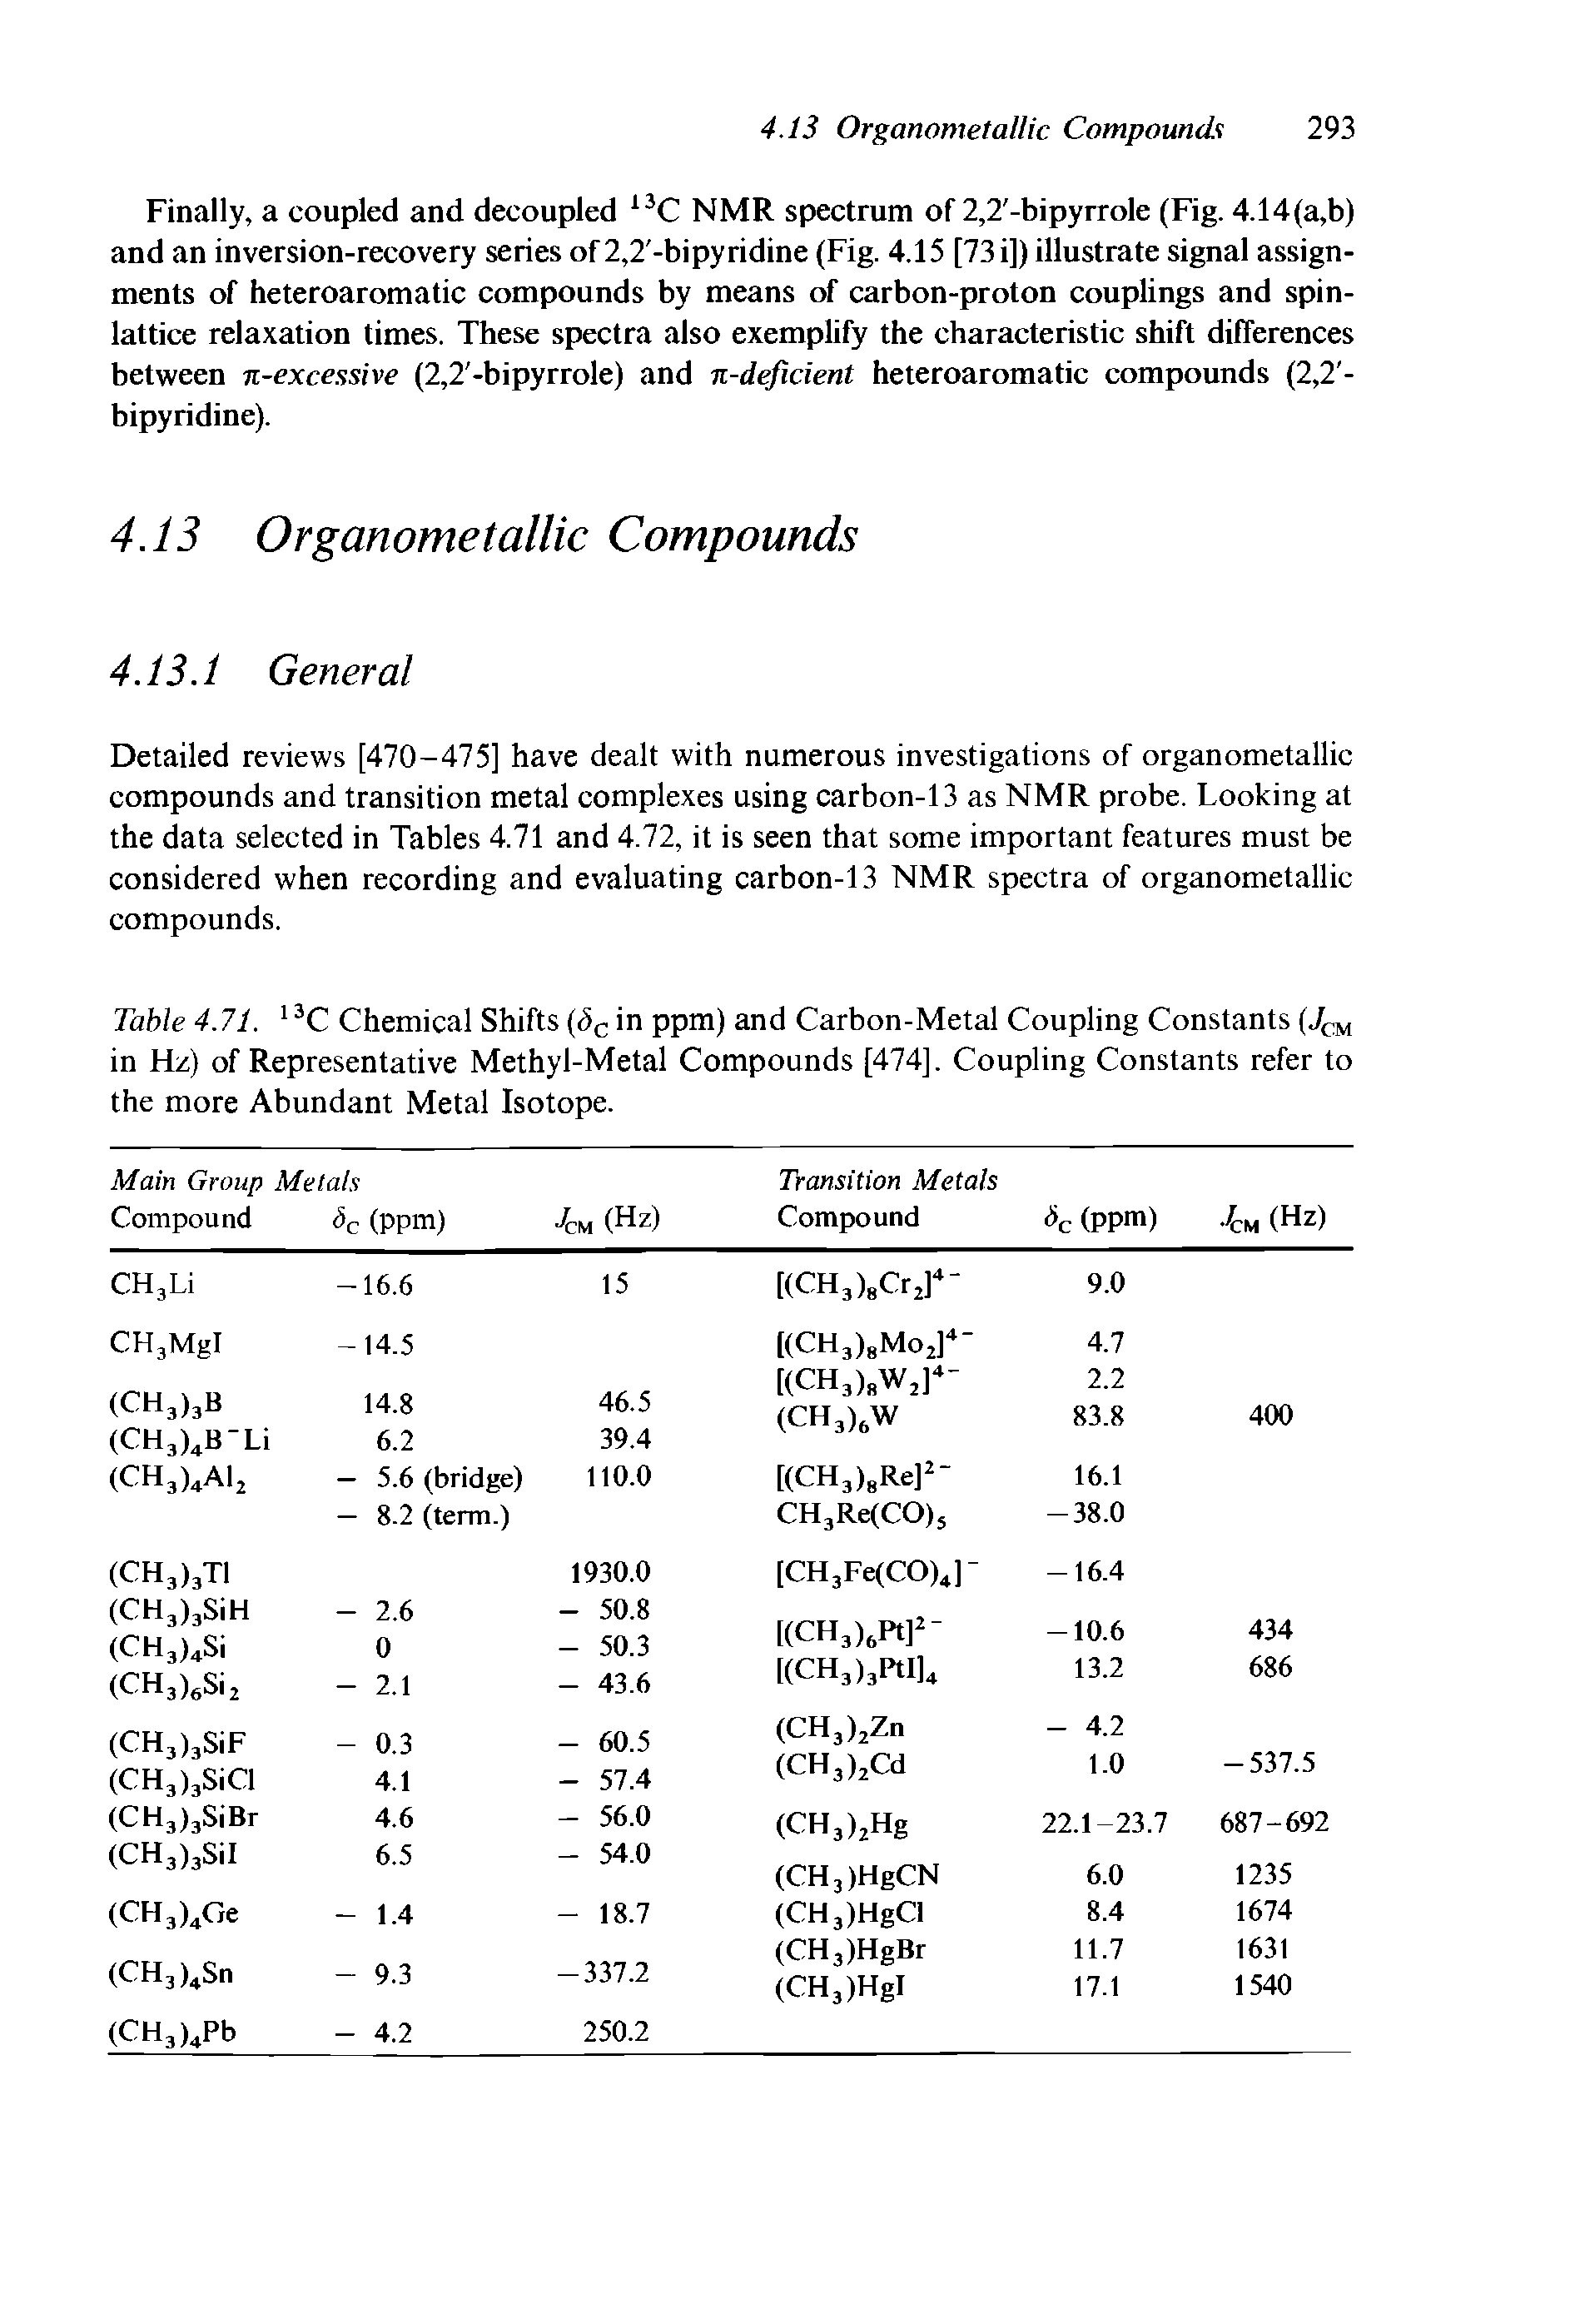 Table 4.71. 13C Chemical Shifts (c>c in ppm) and Carbon-Metal Coupling Constants (JCM in Hz) of Representative Methyl-Metal Compounds [474], Coupling Constants refer to the more Abundant Metal Isotope.